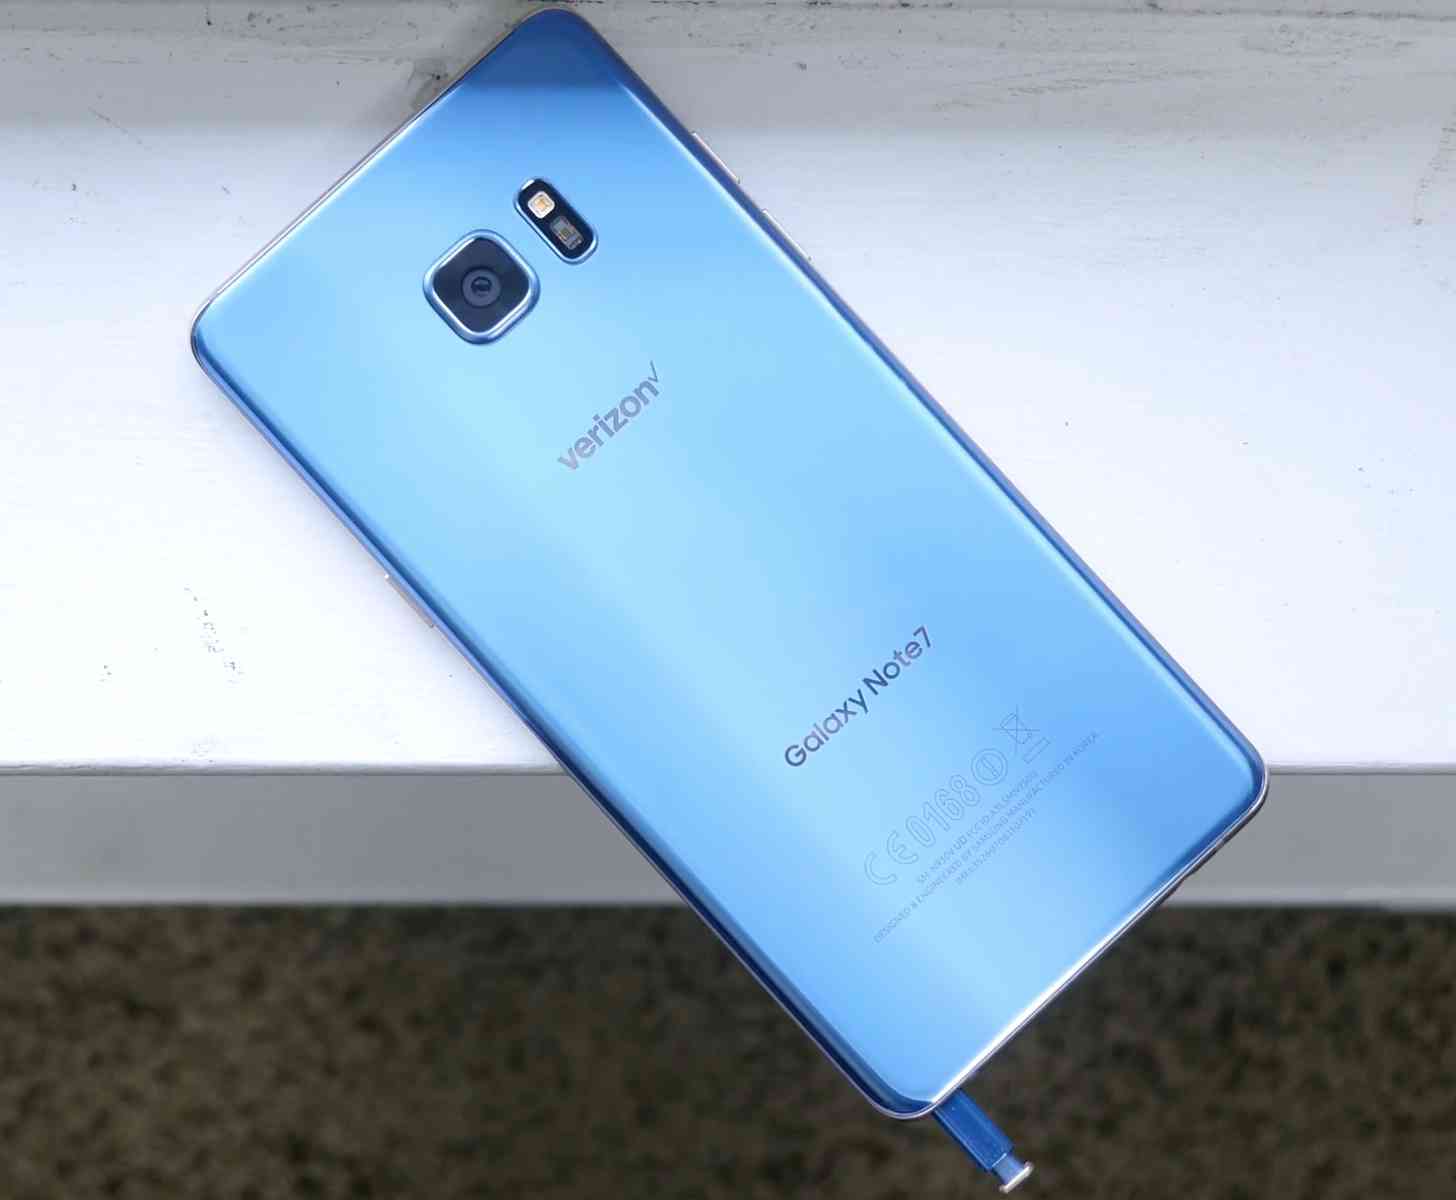 Samsung Galaxy Note 7 Coral Blue hands-on